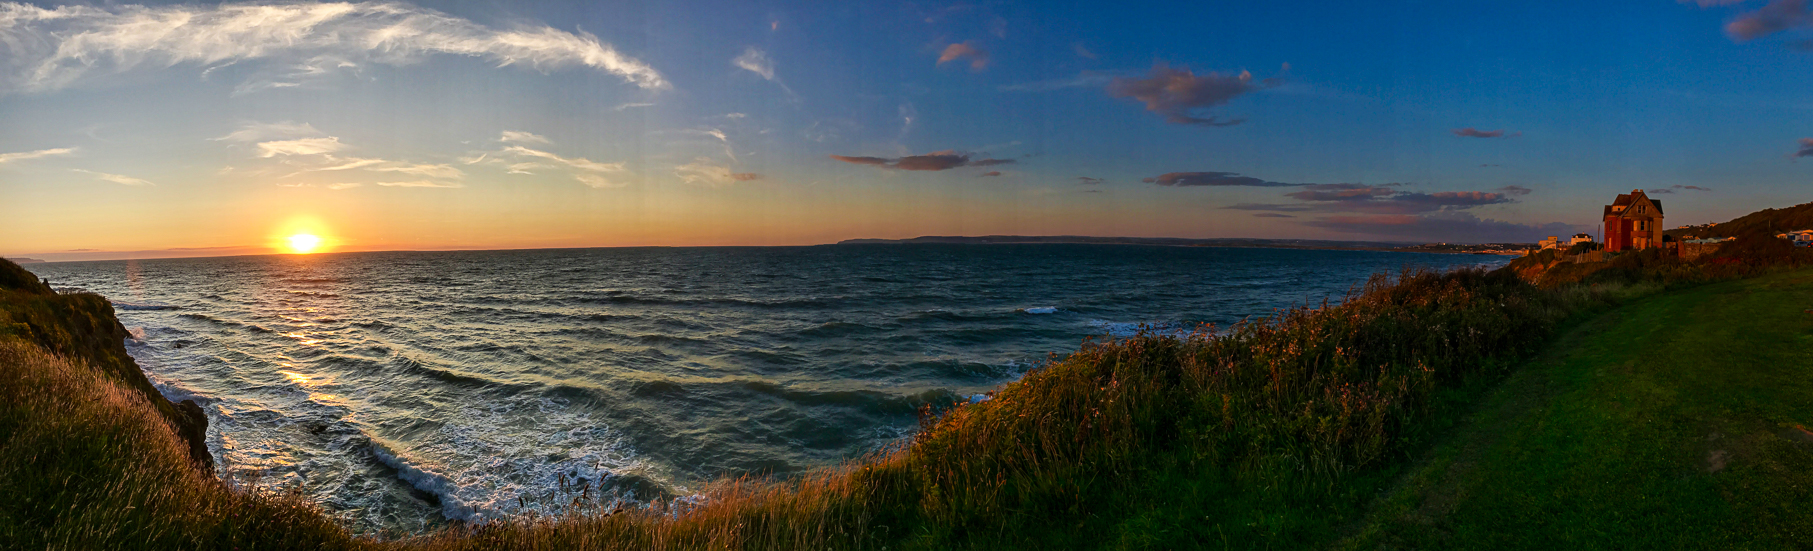 Sunset Pano with iPhone